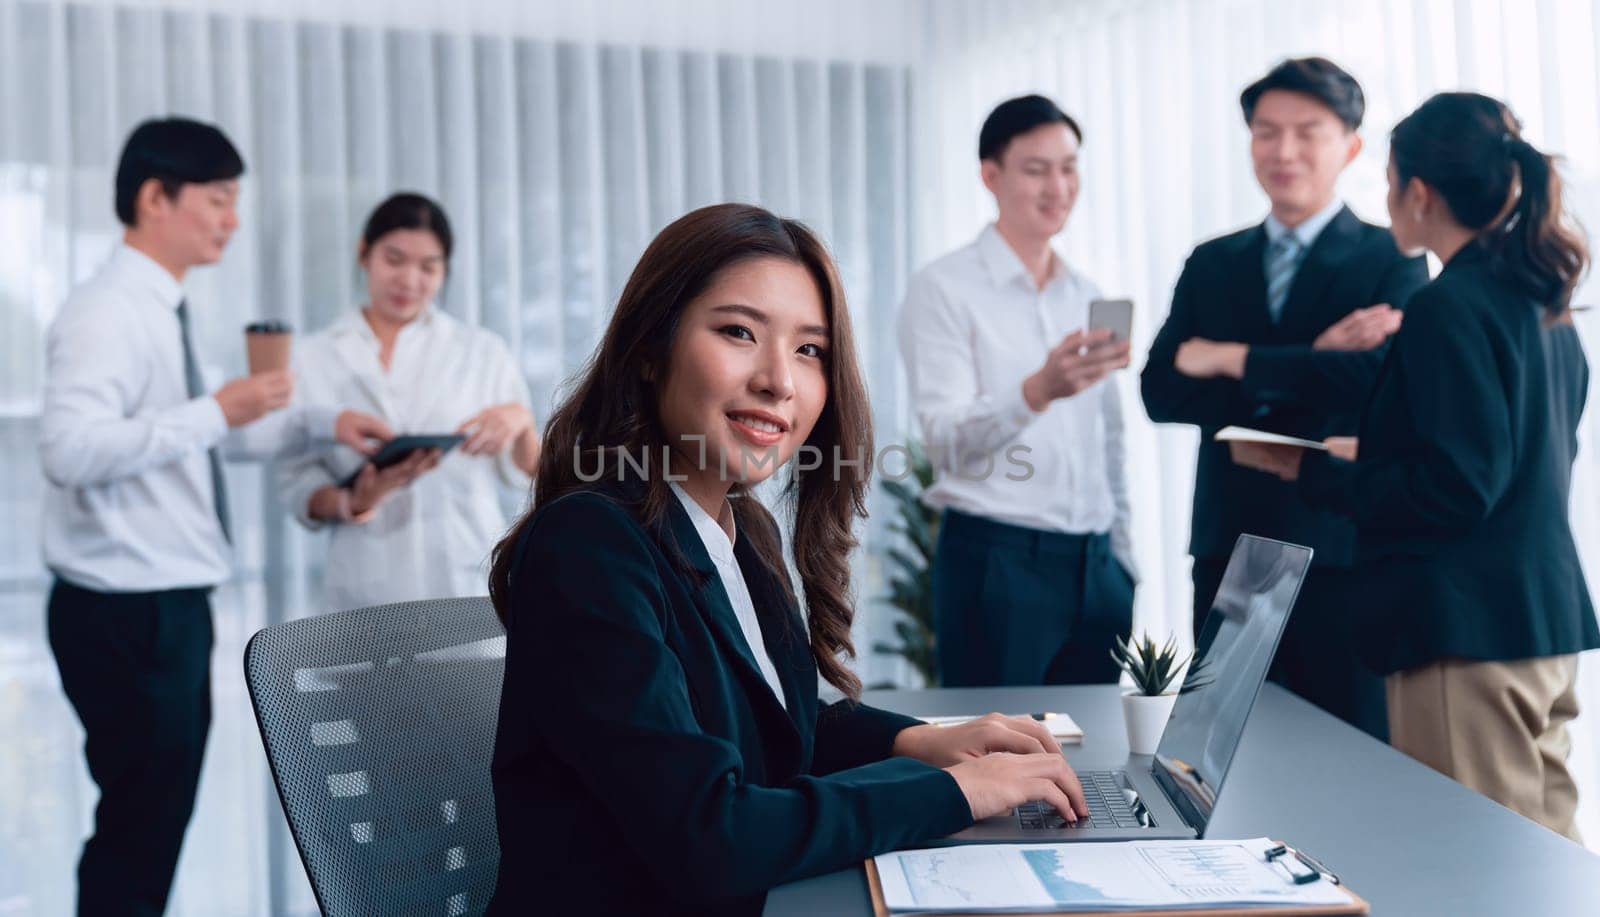 Focus portrait of female manger, businesswoman in the harmony meeting room with blurred of colleagues working together, analyzing financial paper report and dashboard data in background.